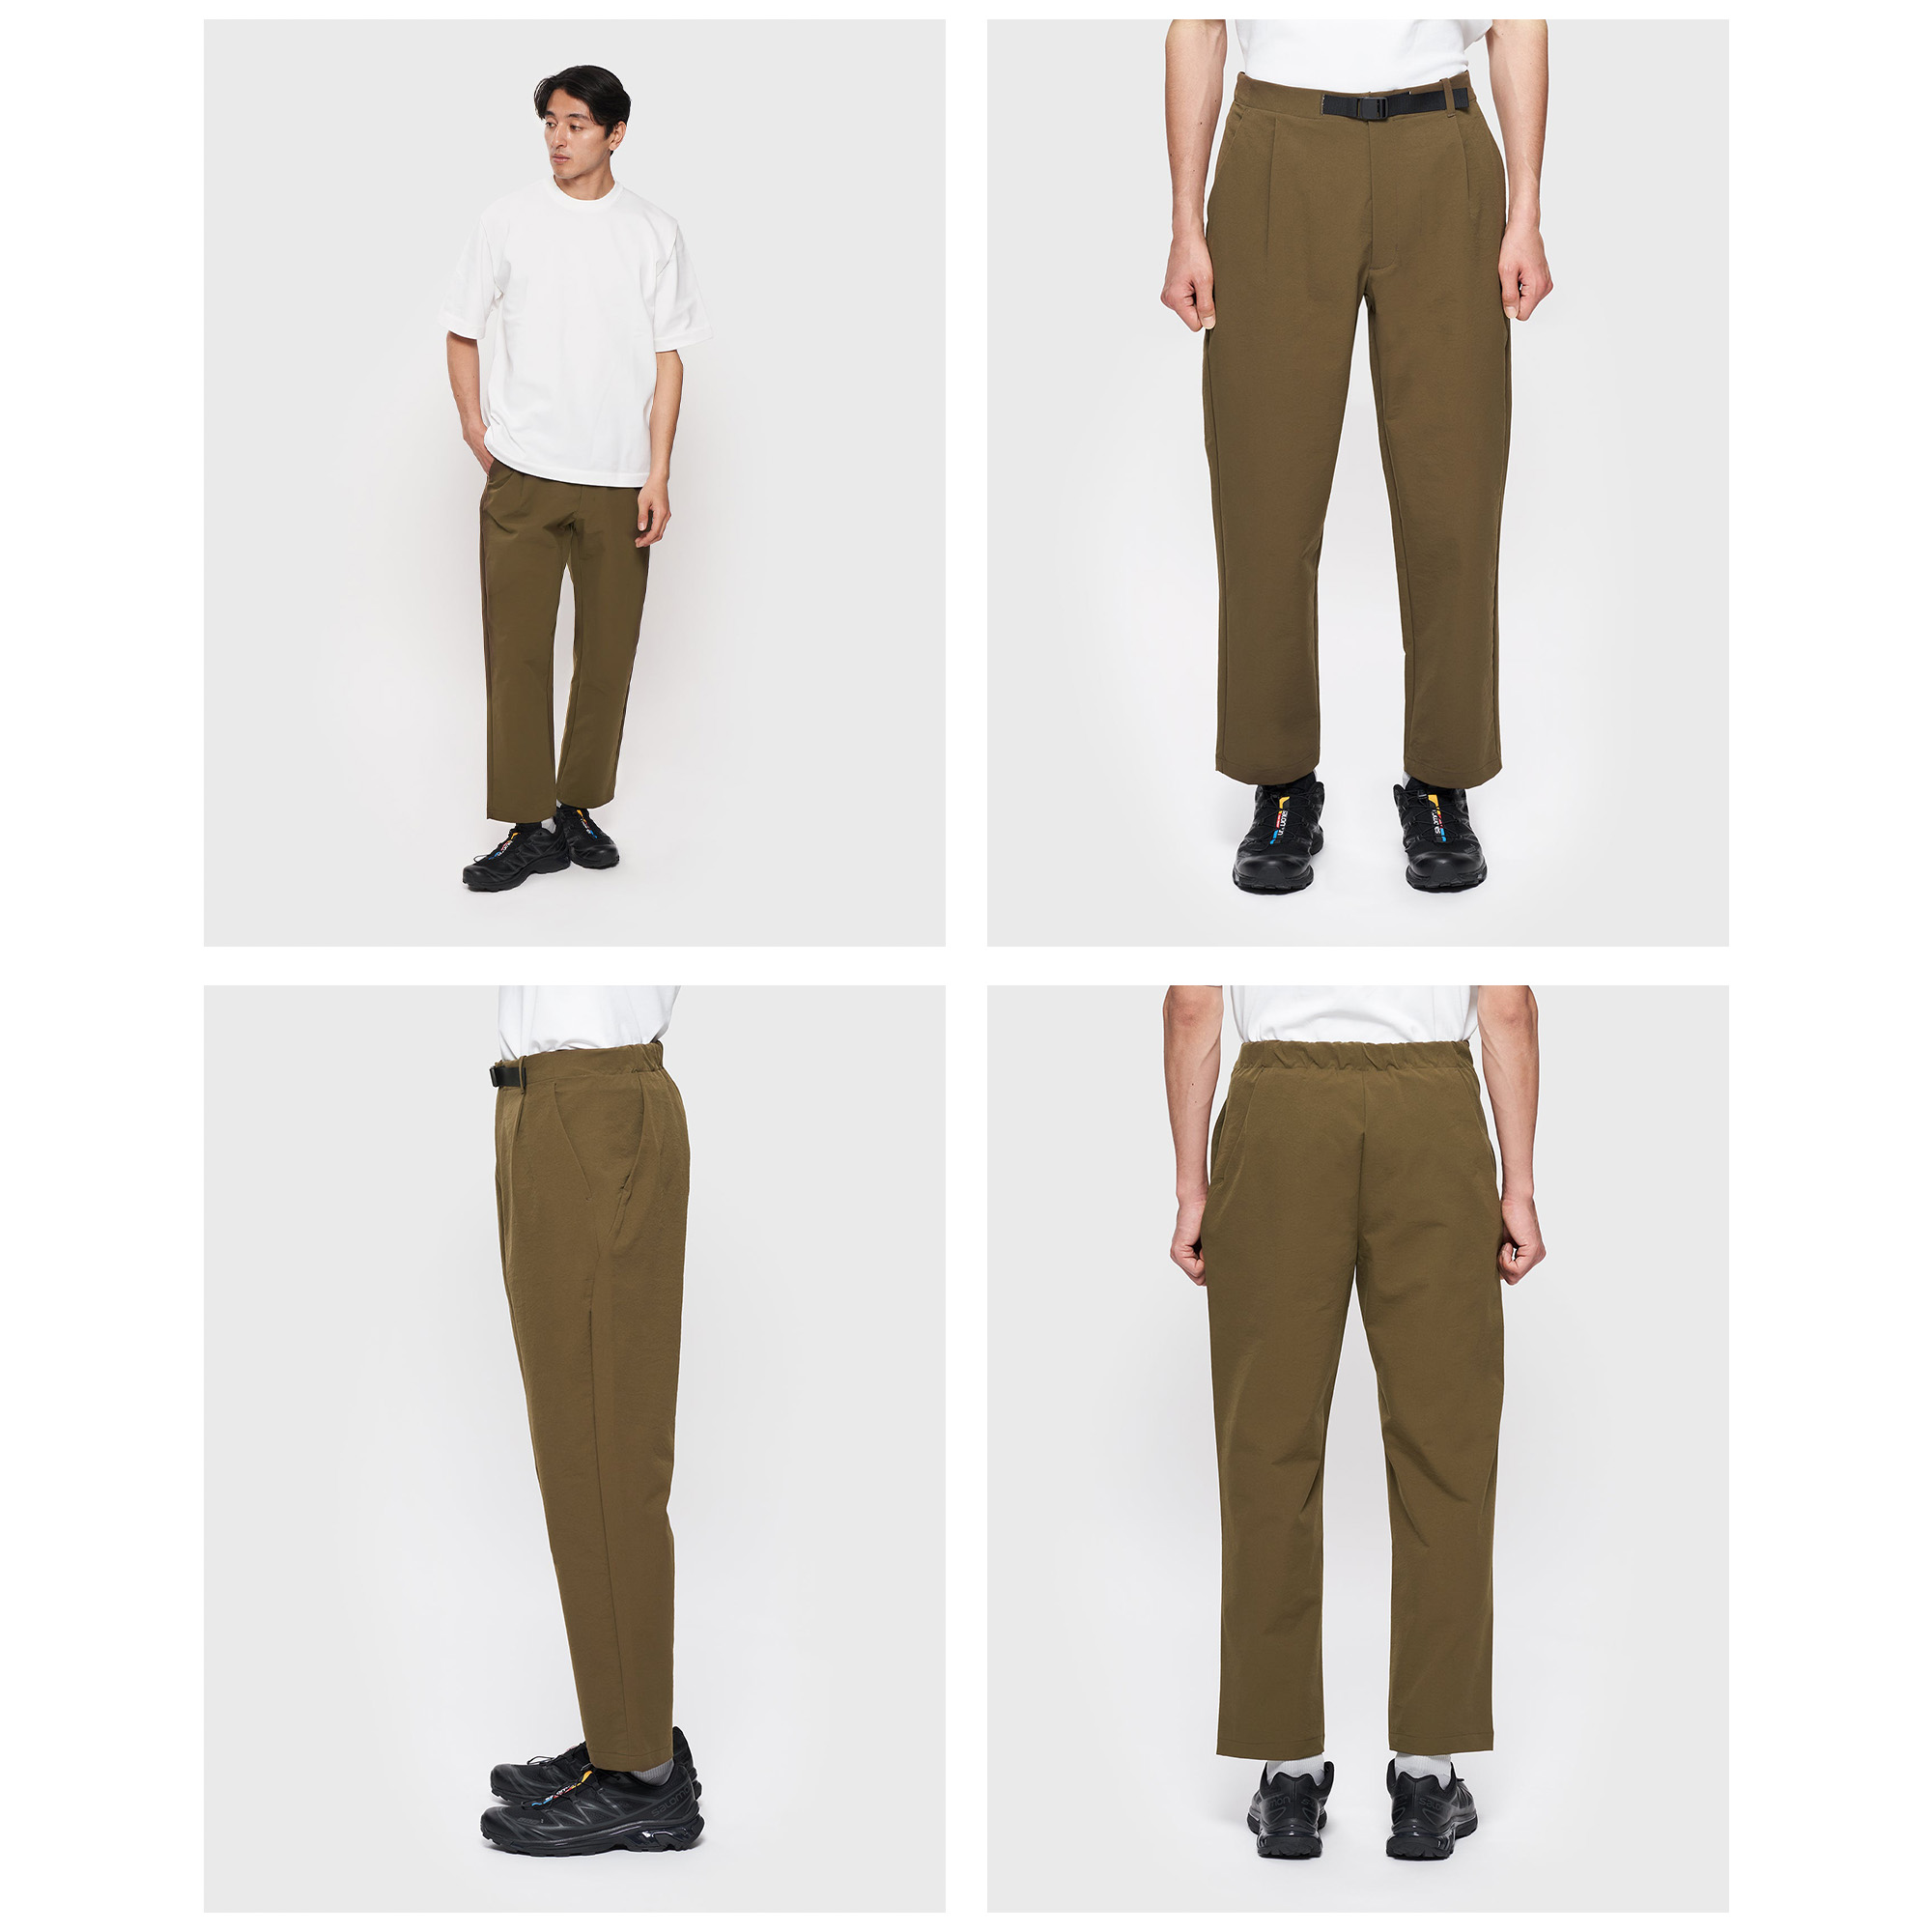 Goldwin's Pants Guide for Spring Summer | Product Guides | Goldwin 